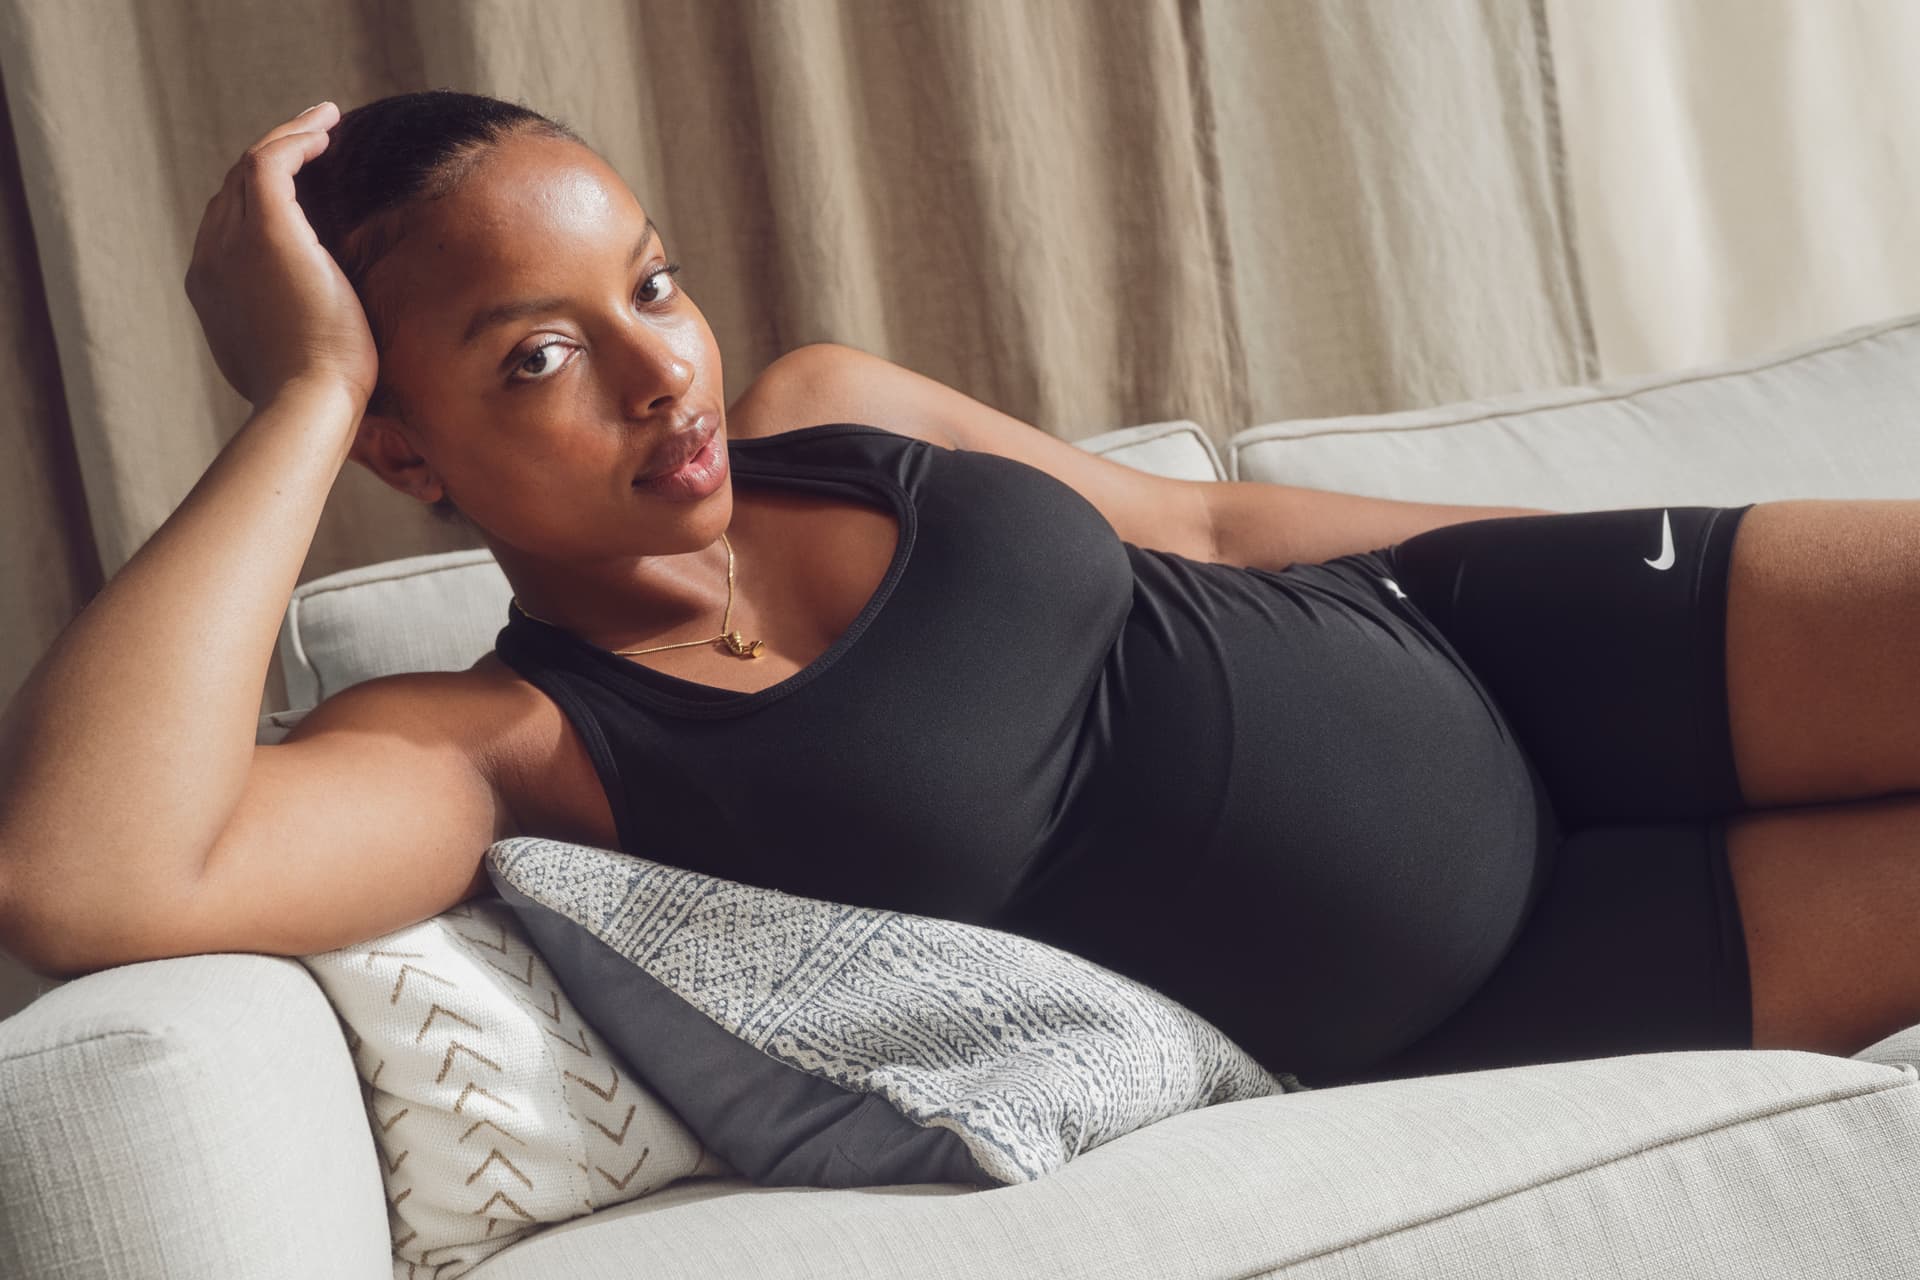 Nike's new maternity collection is made for mamas of all shapes and sizes.